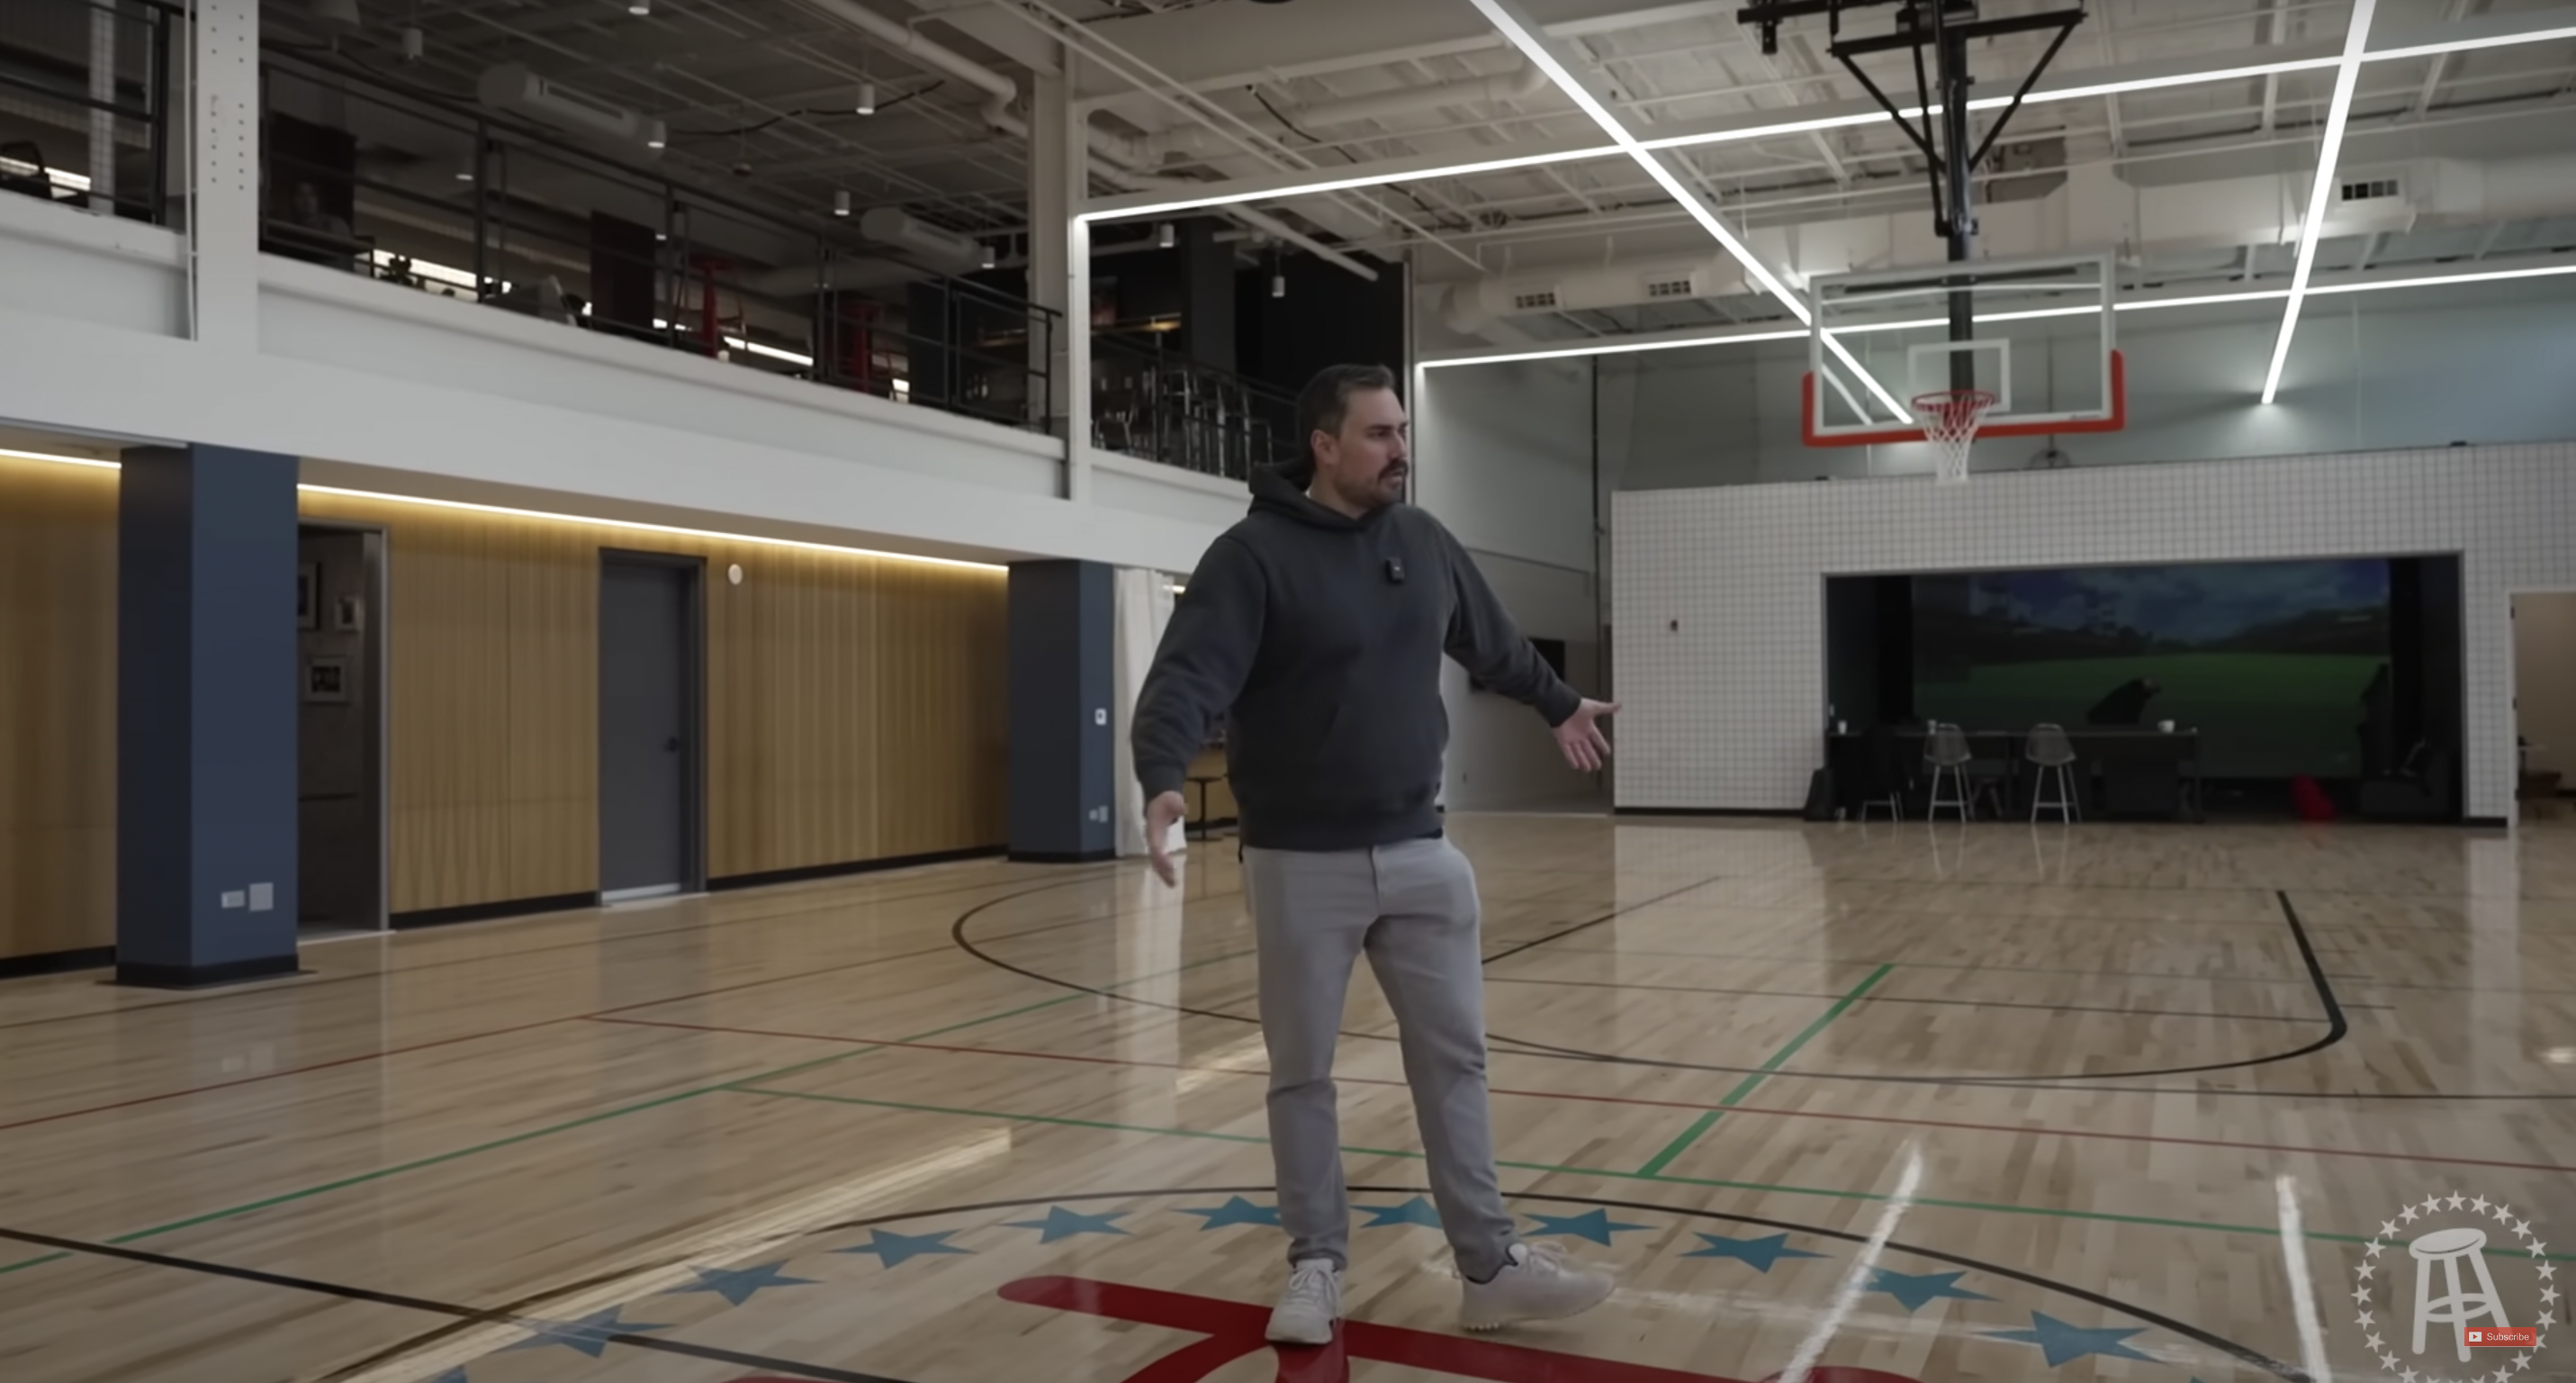 Dan Katz a.ka. Barstool Big Cat unveils the company's new $20 million content factory in Chicago.